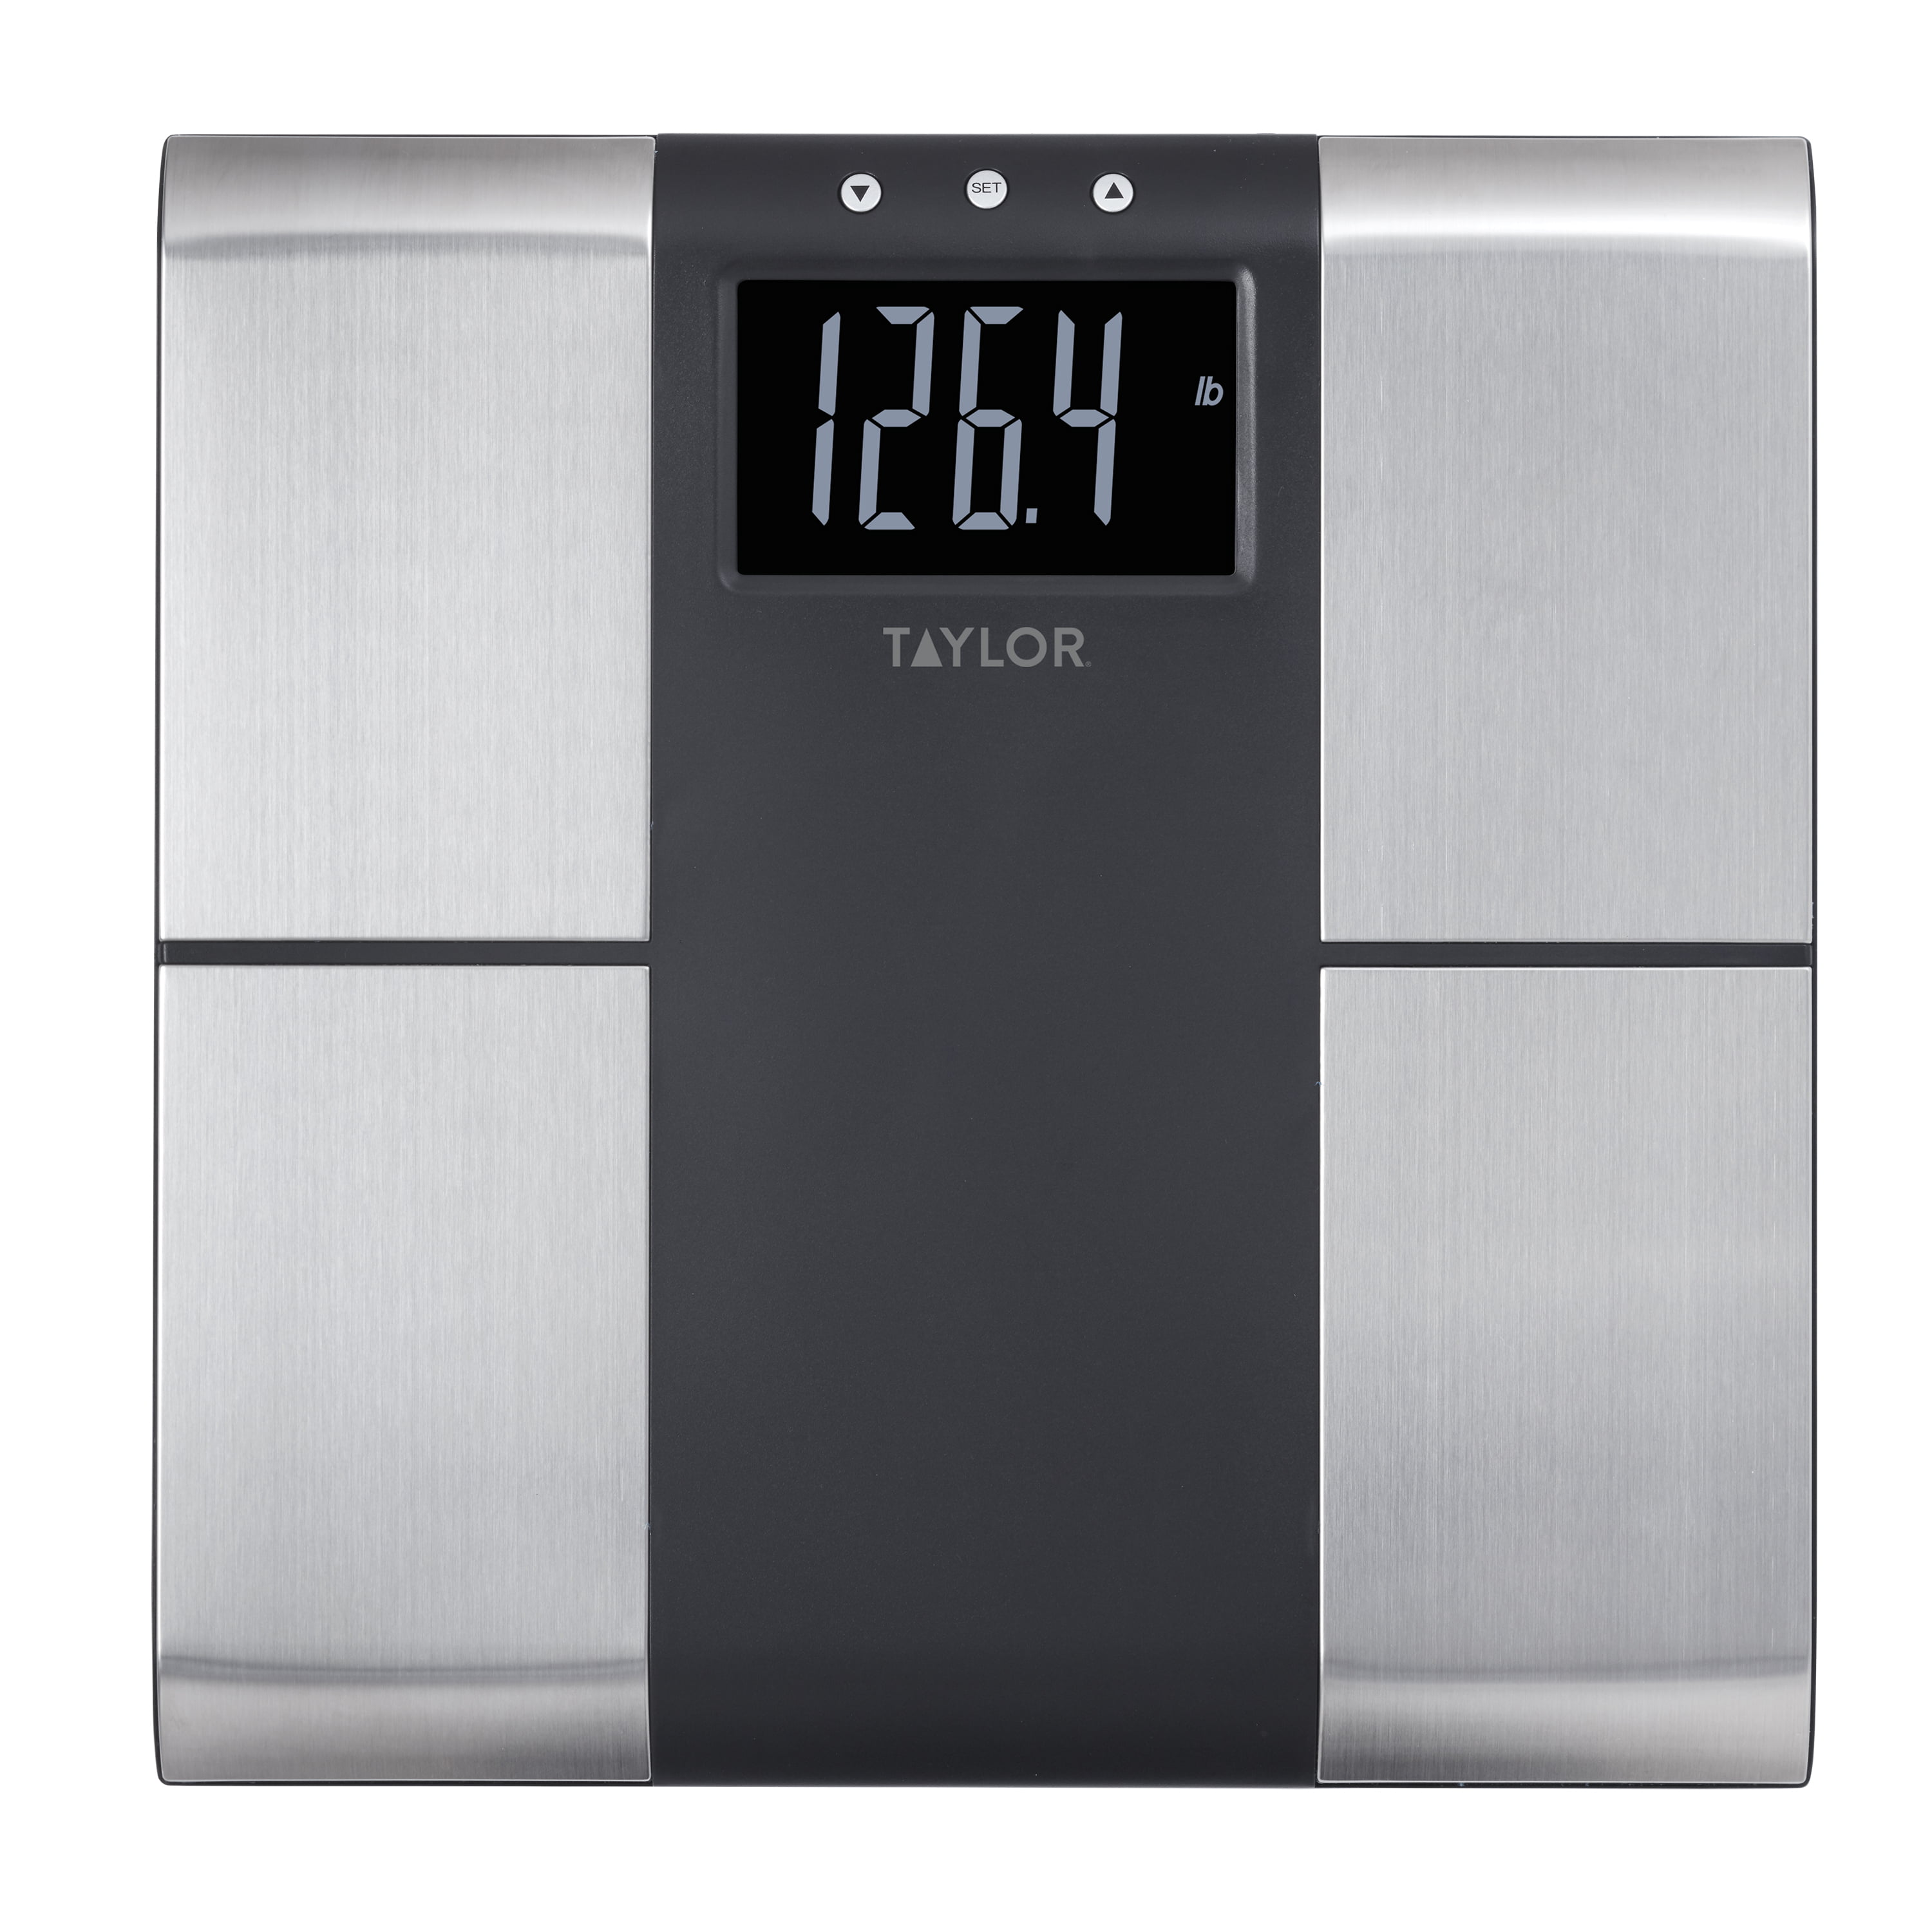 500 pound weight scale